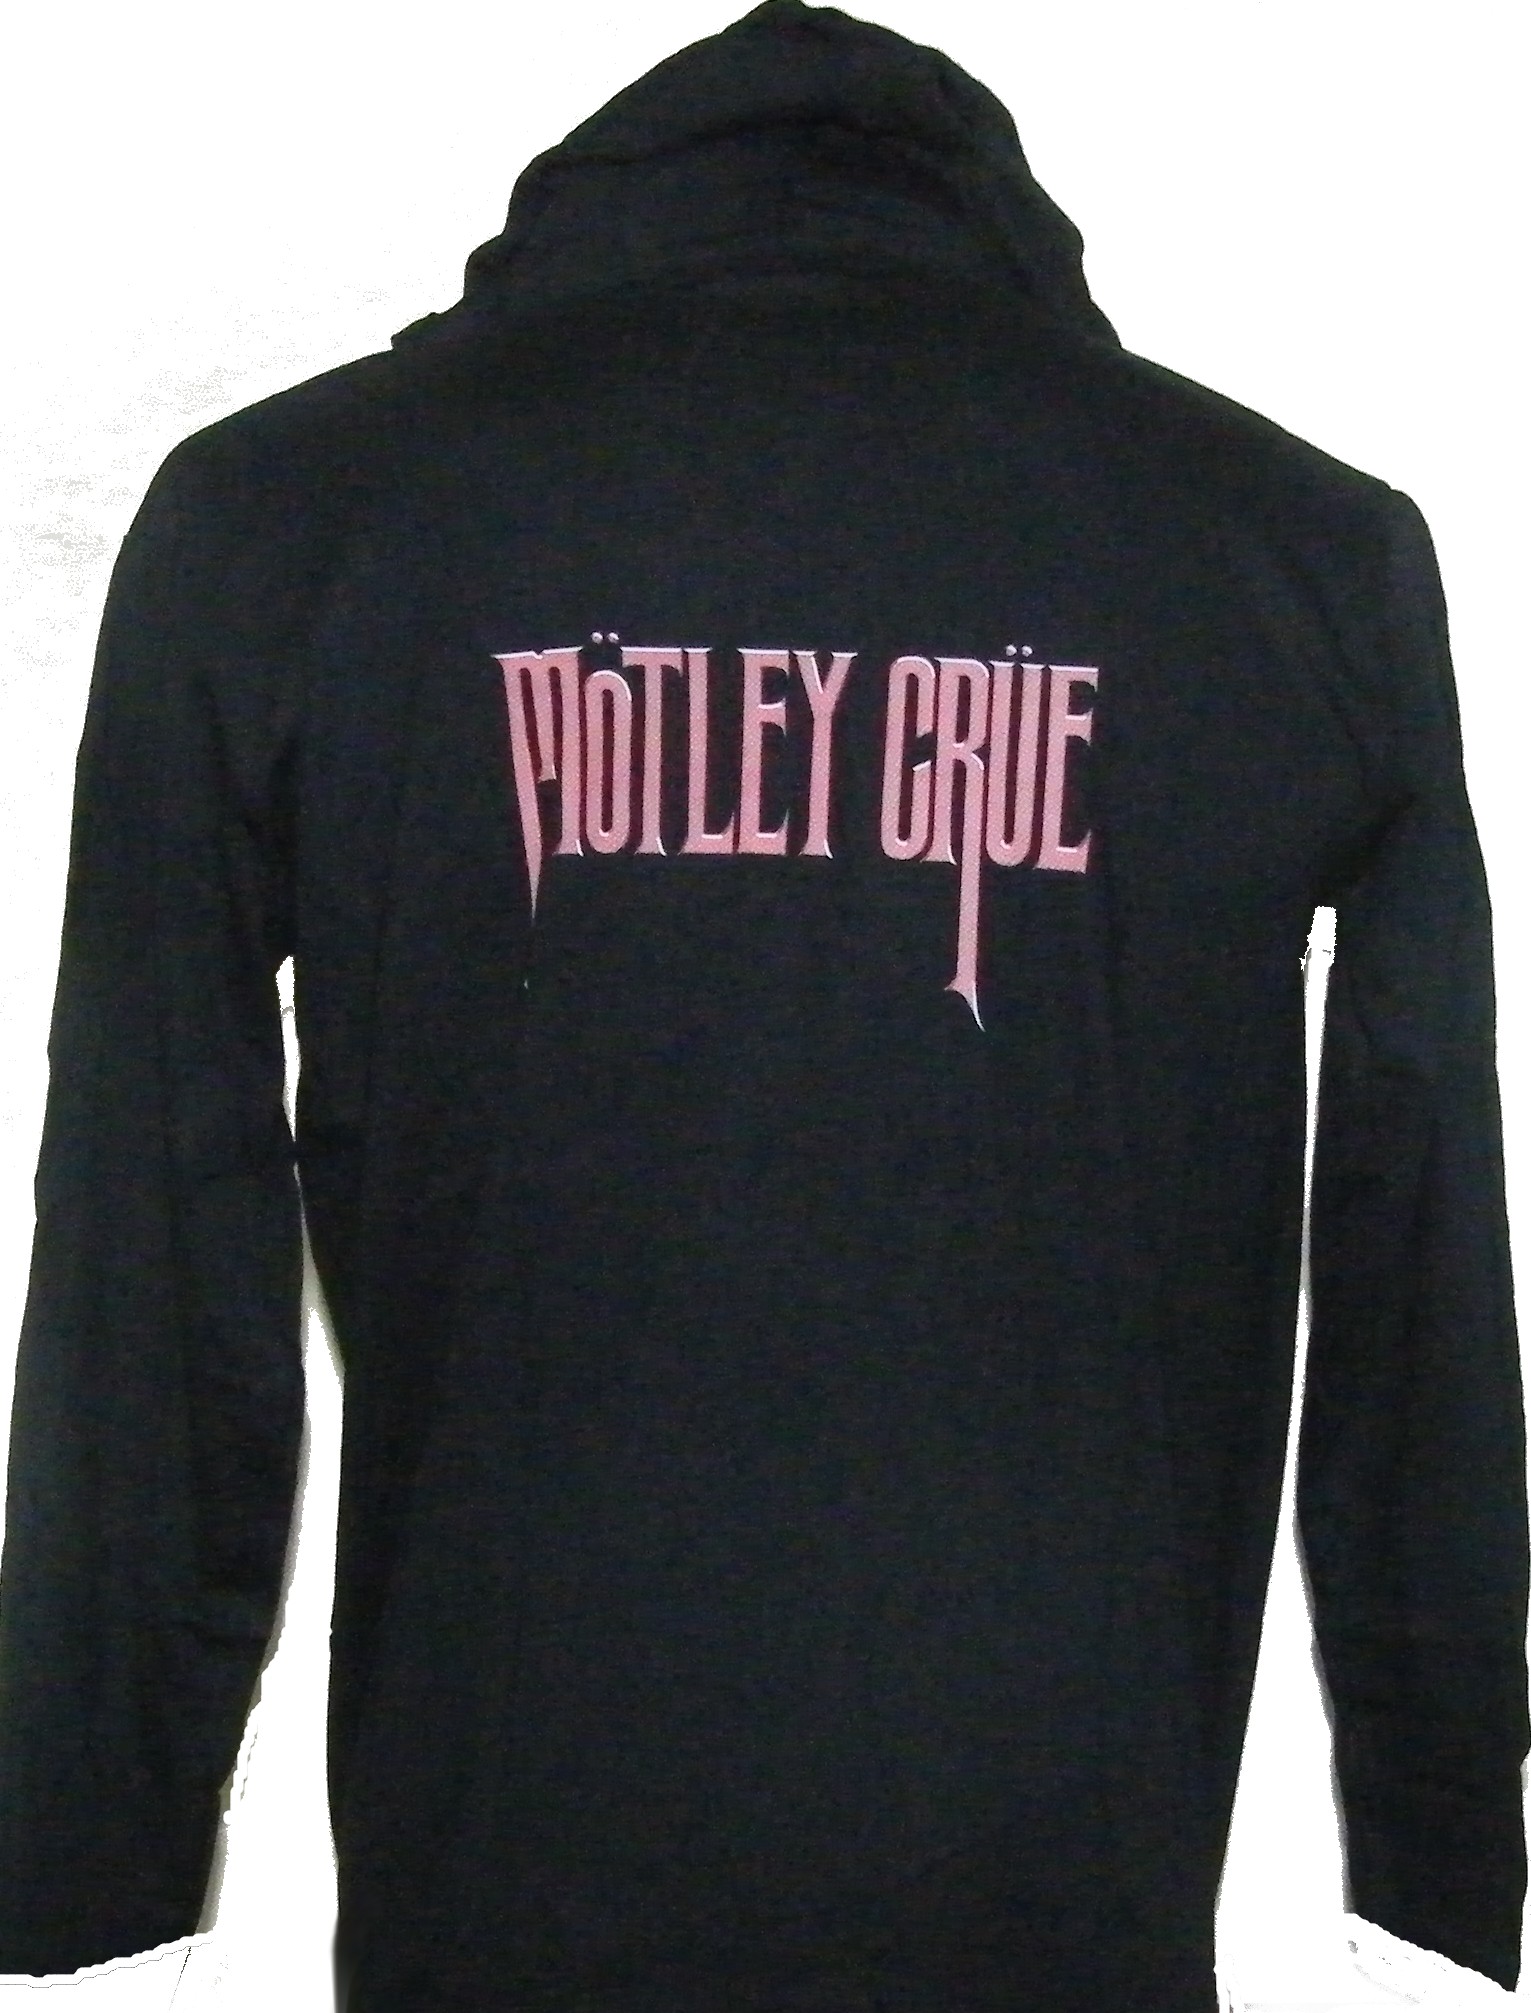 Motley Crue long-sleeved t-shirt w/hoodie Too Fast For Love size M ...